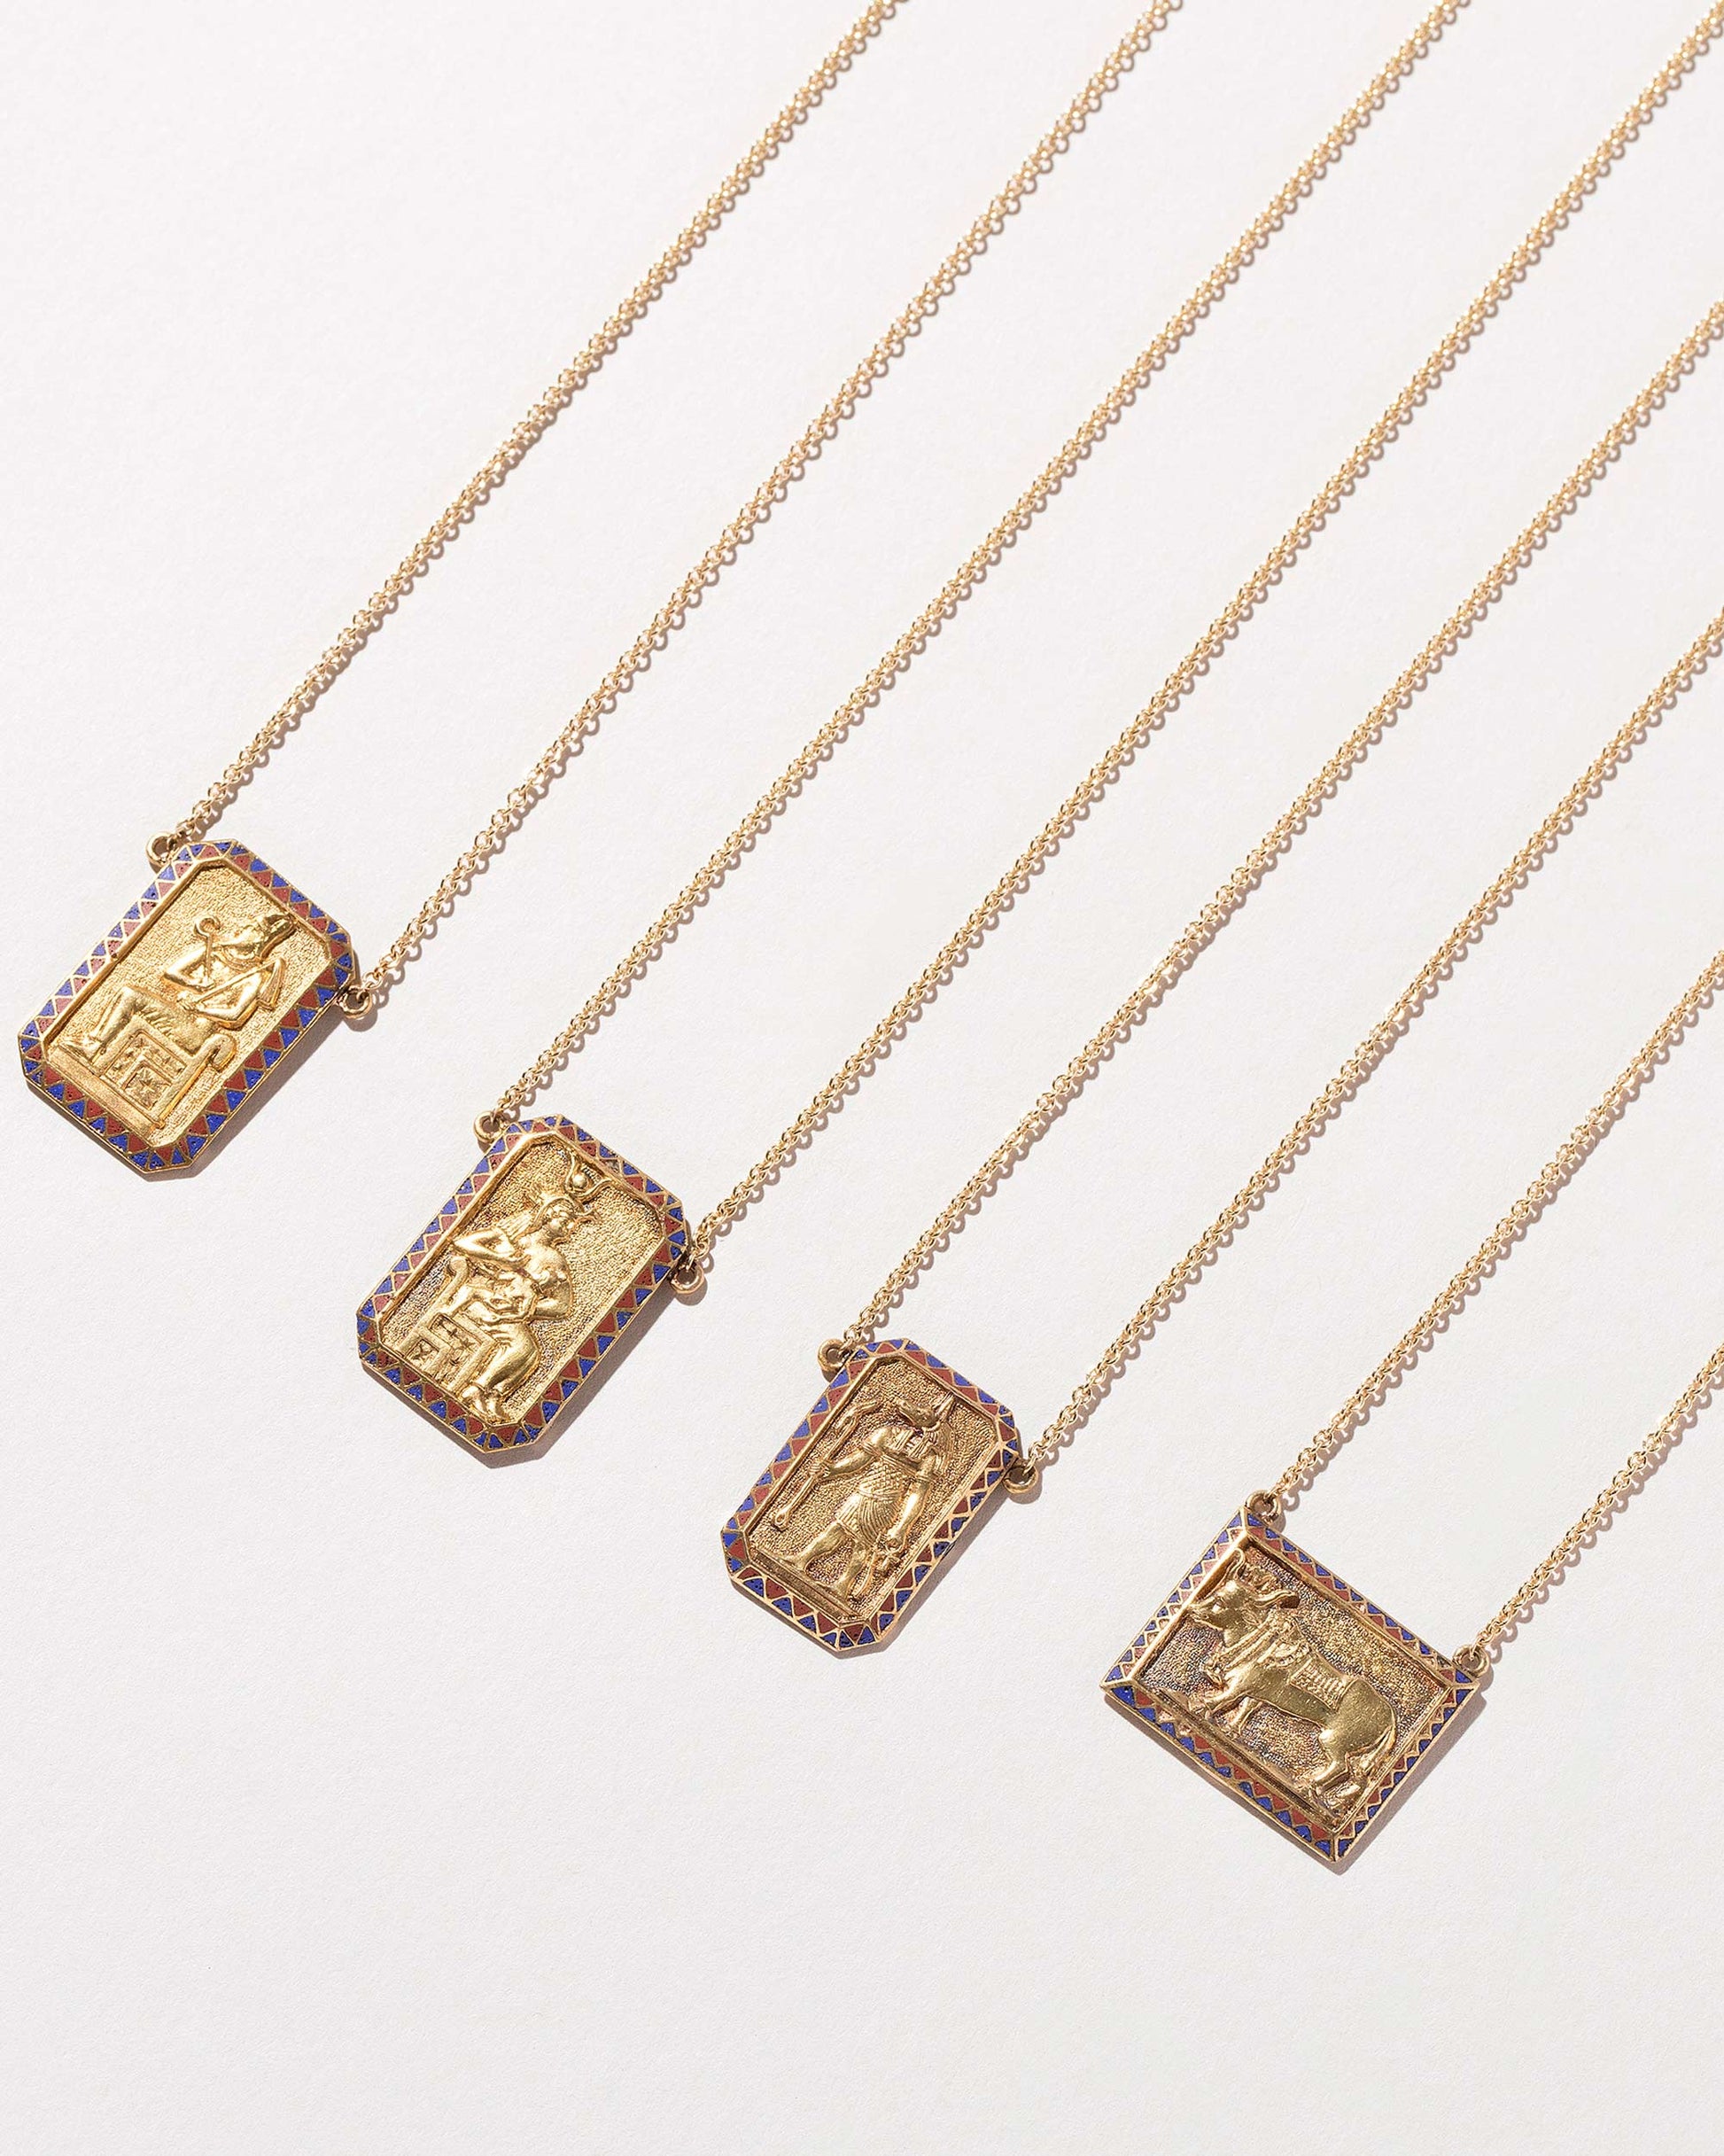 Group of  Deity Necklace on light color background.